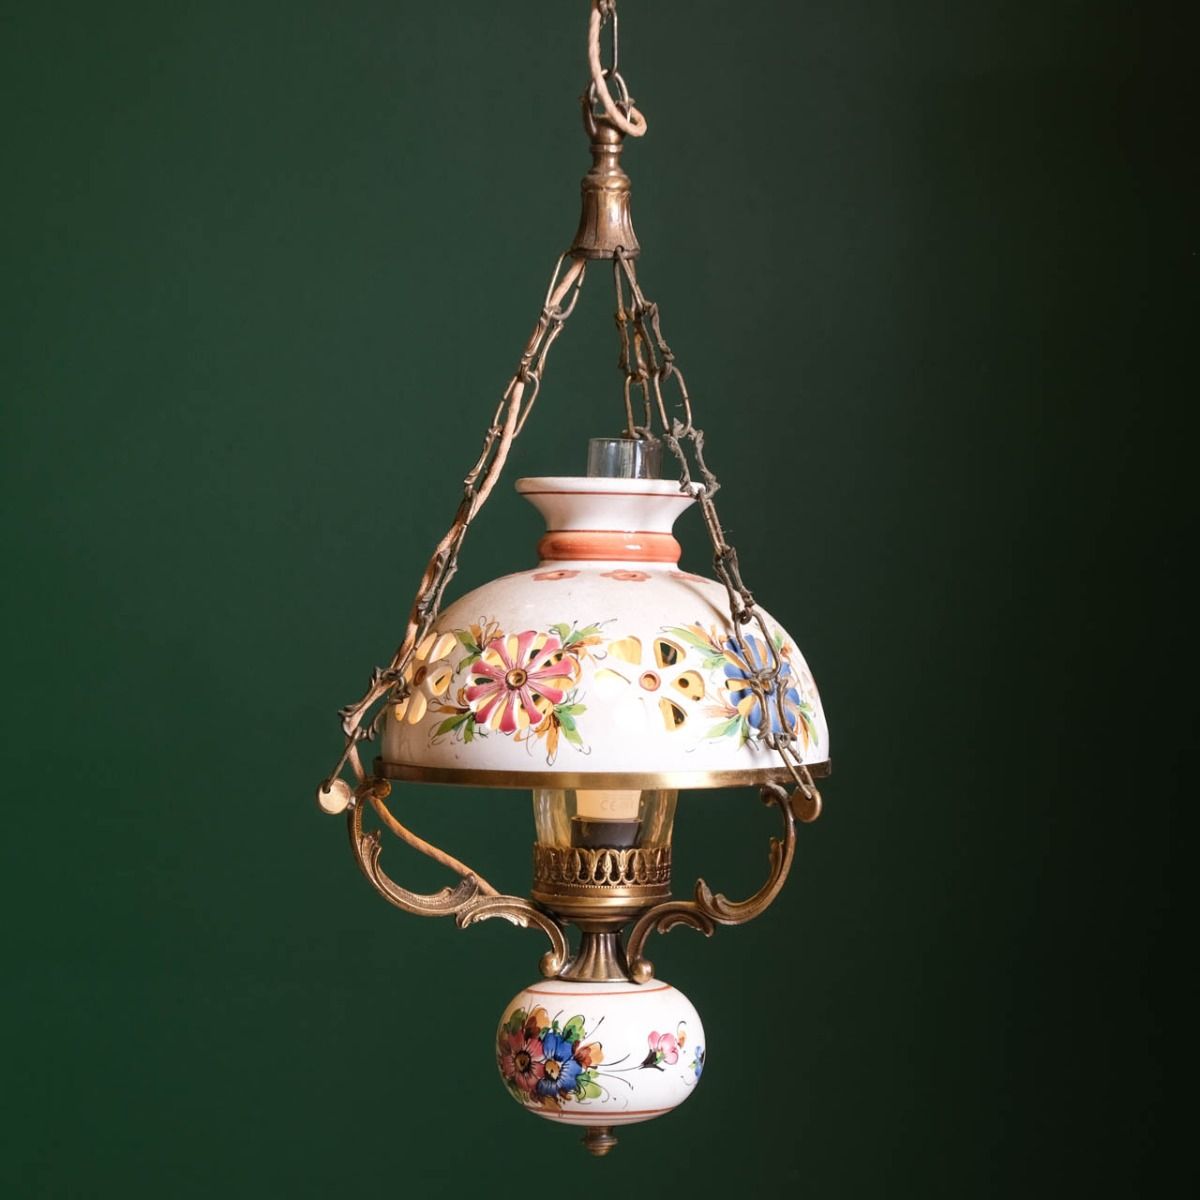 Vintage Ceramic Chandelier, French chandelier with brass and ceramic ornaments